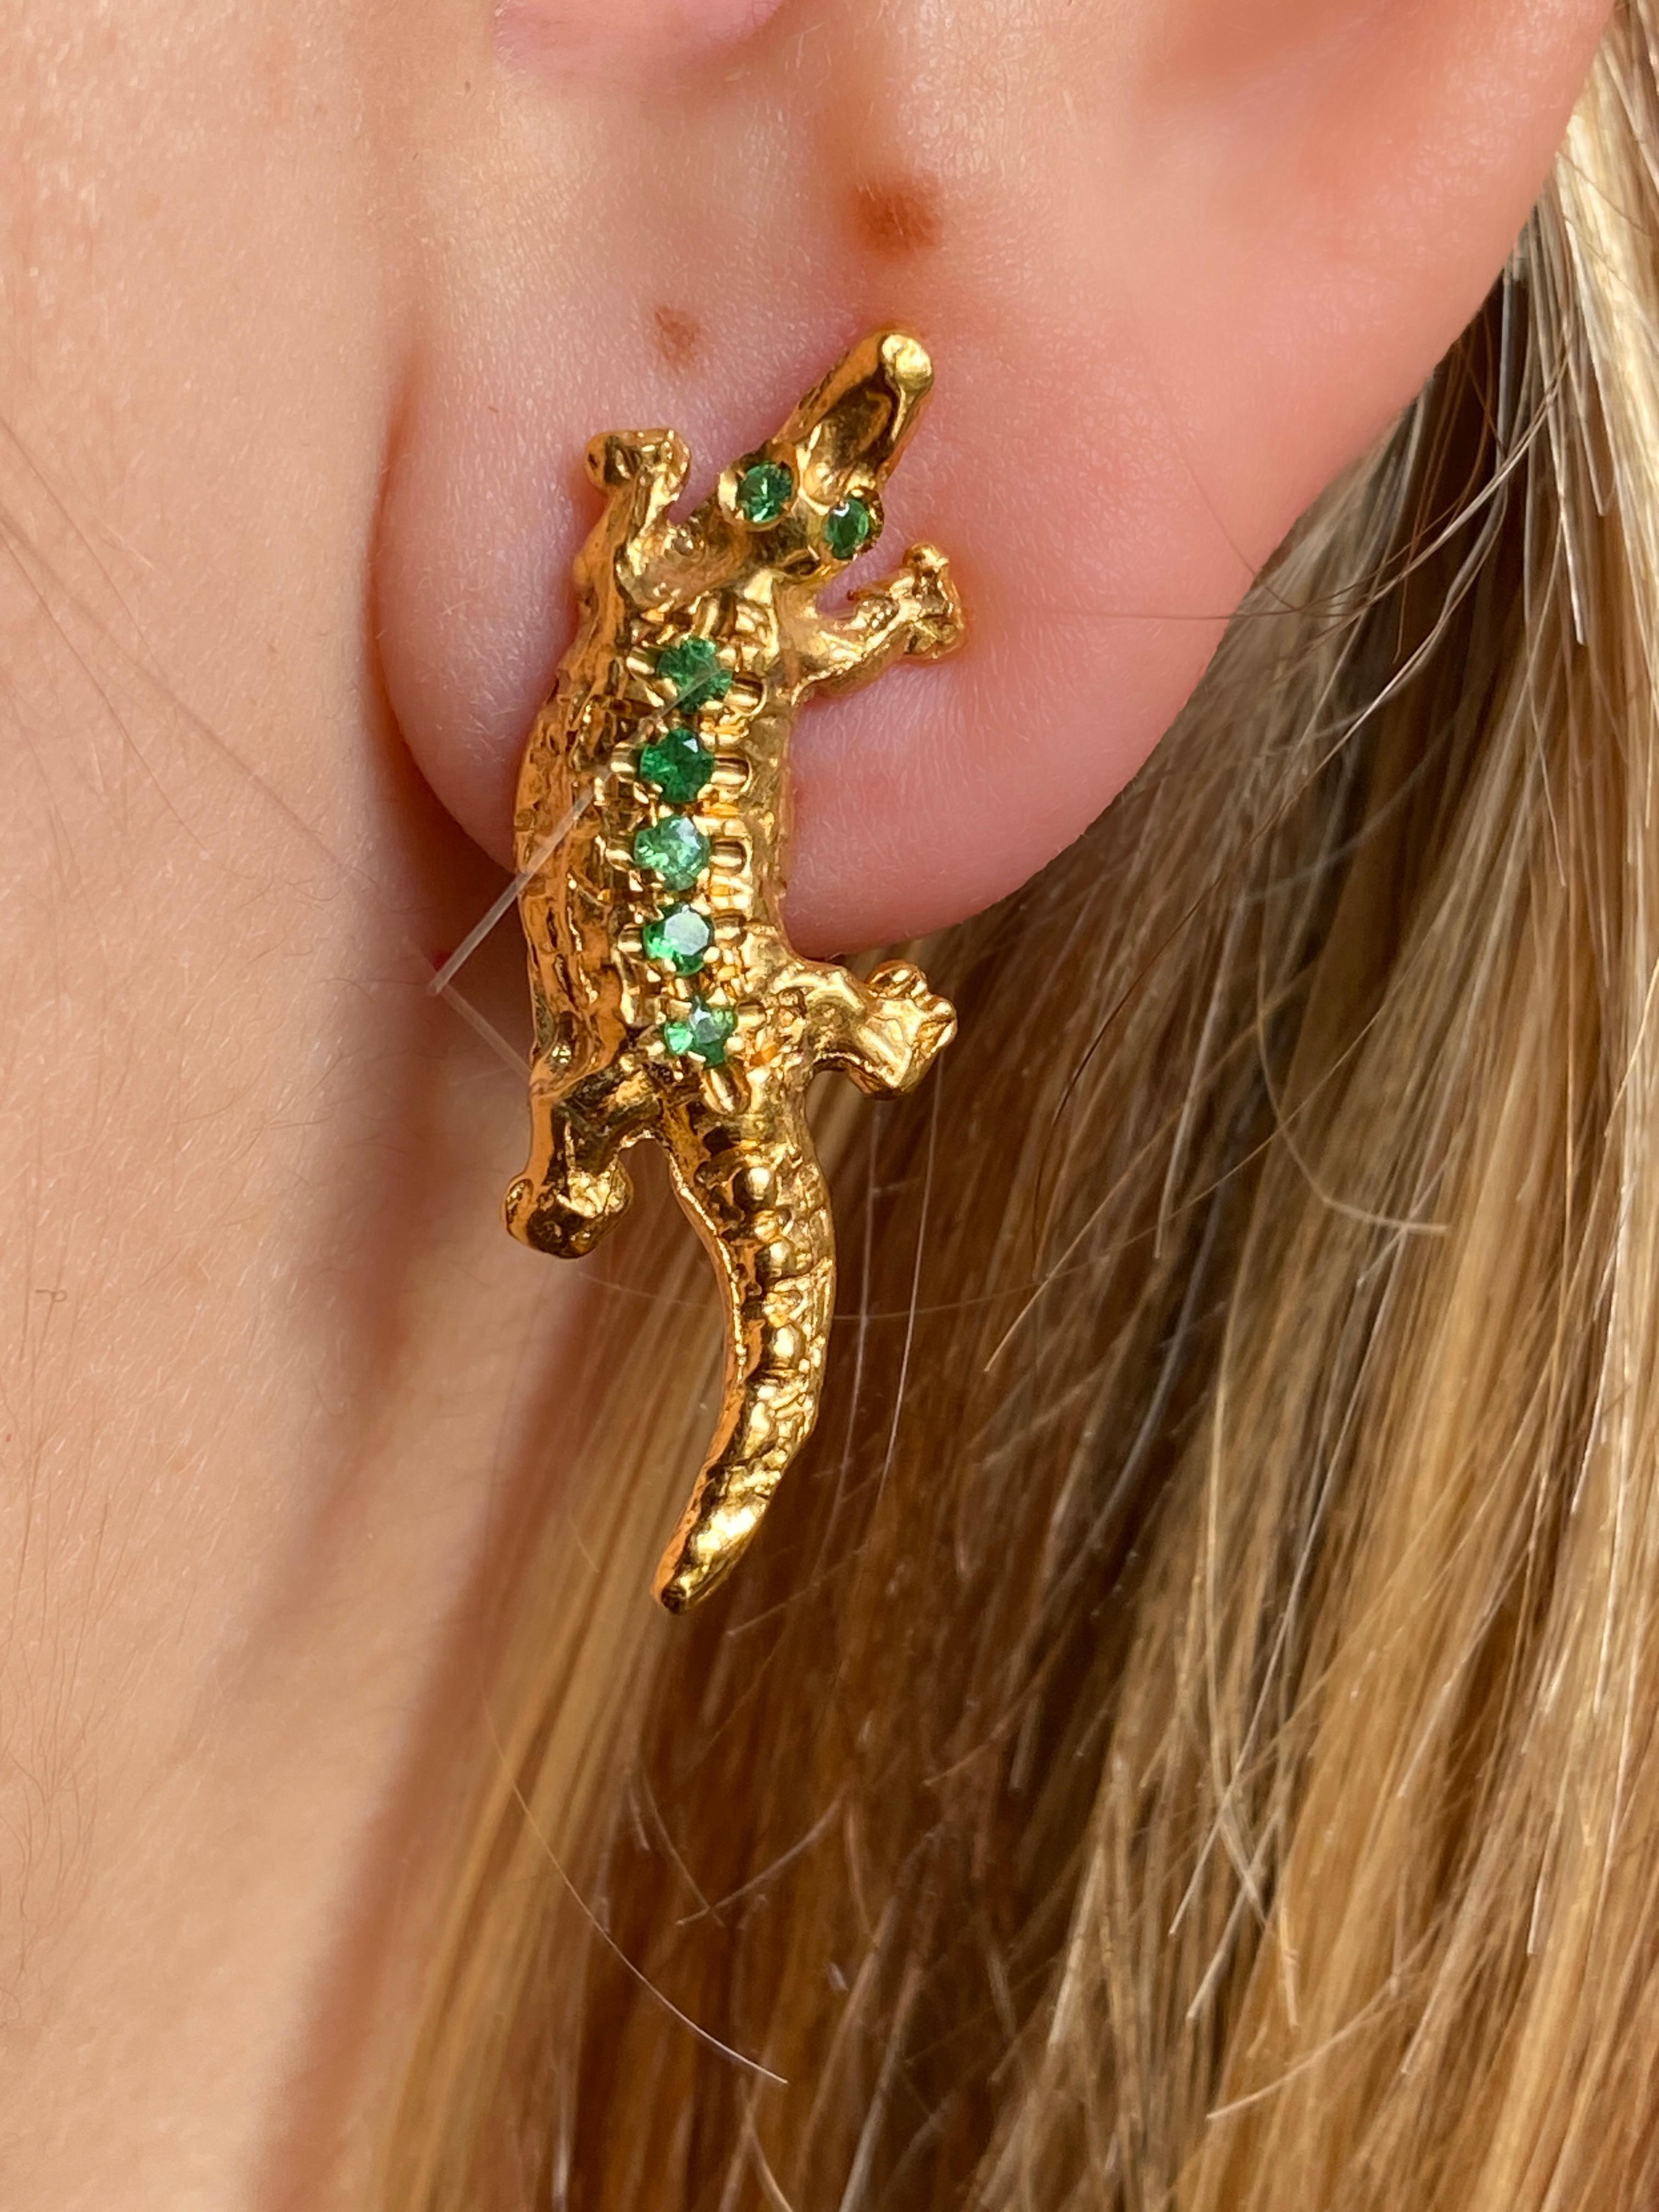 Rossella Ugolini Unisex Alligator Stud Earrings 18K Yellow Gold Emeralds  In New Condition For Sale In Rome, IT